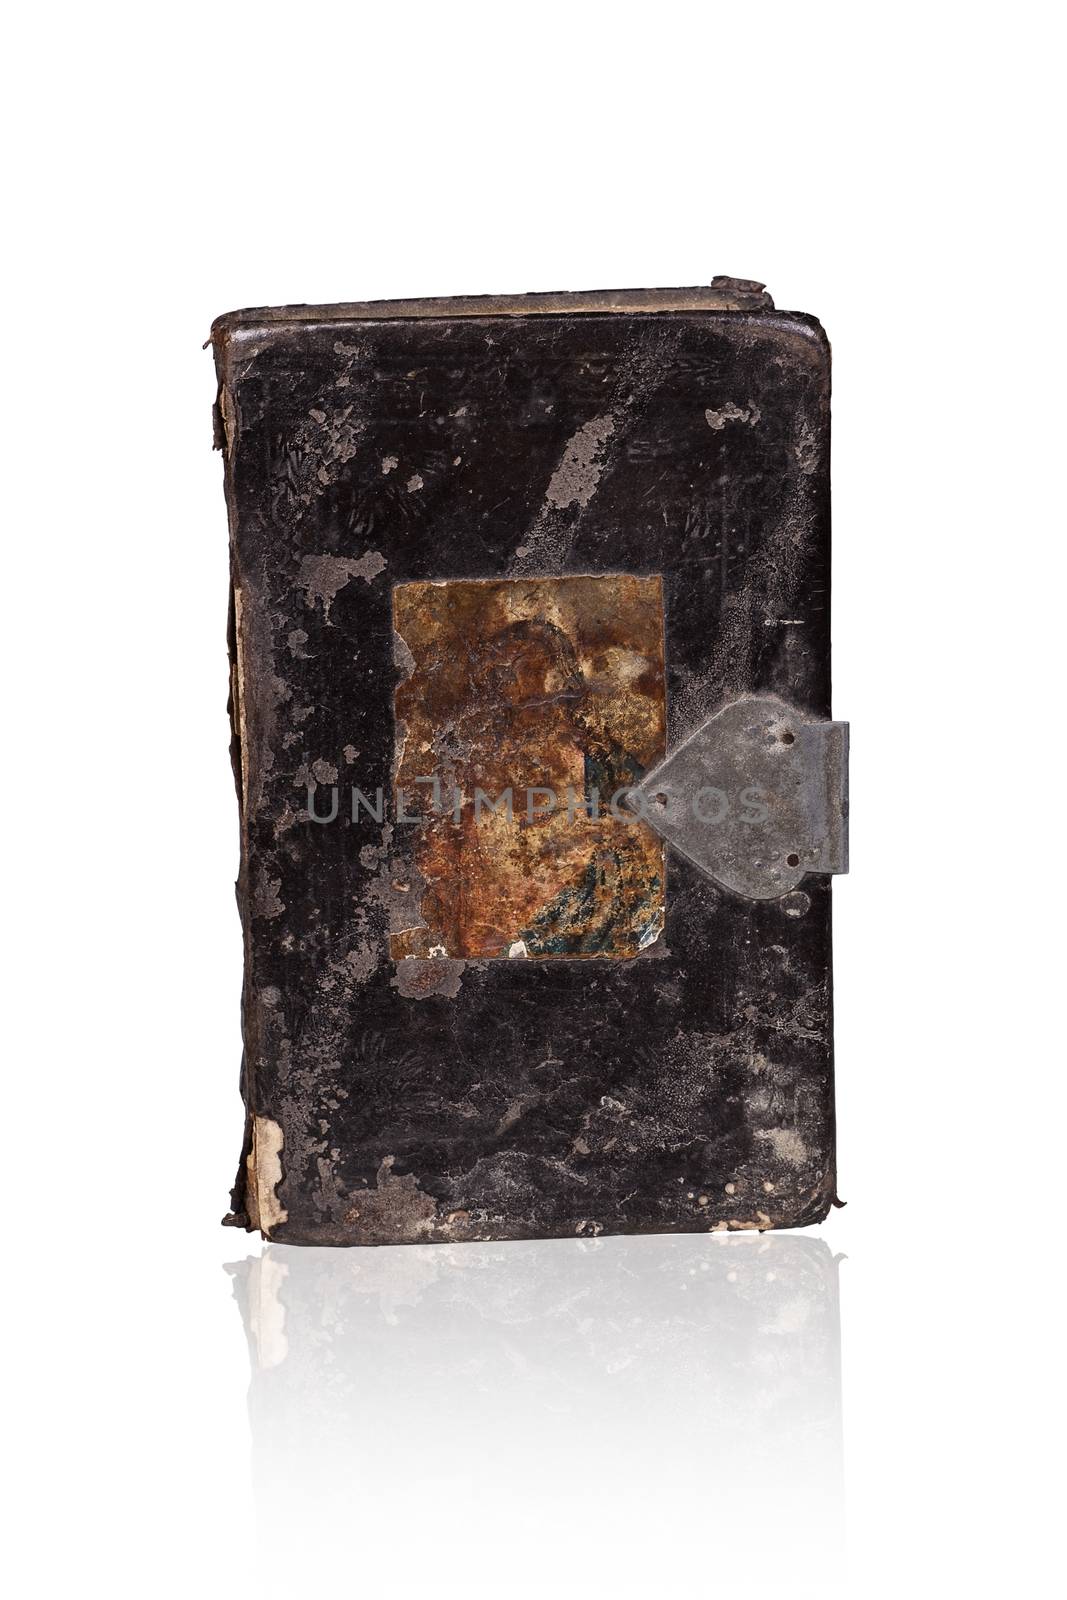 Old antique book isolated on white background with clipping path.